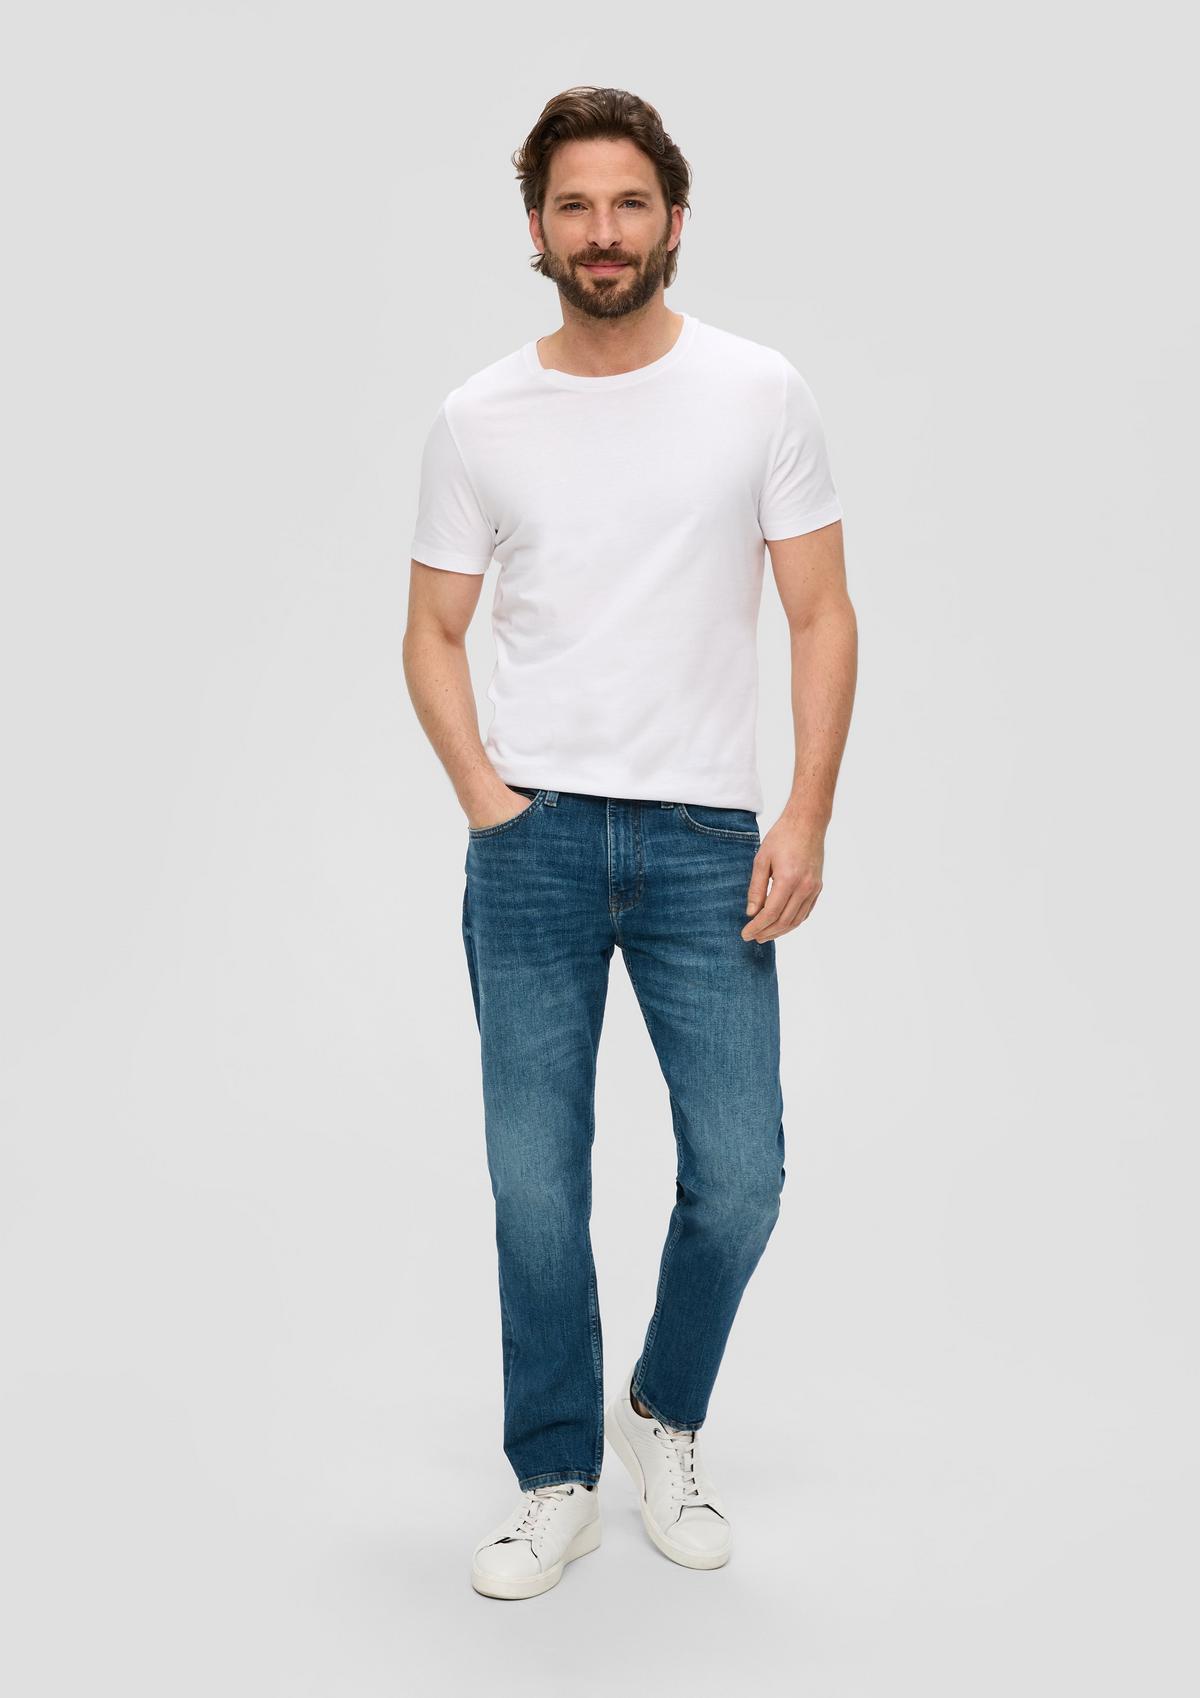 s.Oliver Mauro jeans / regular fit / high rise / tapered leg